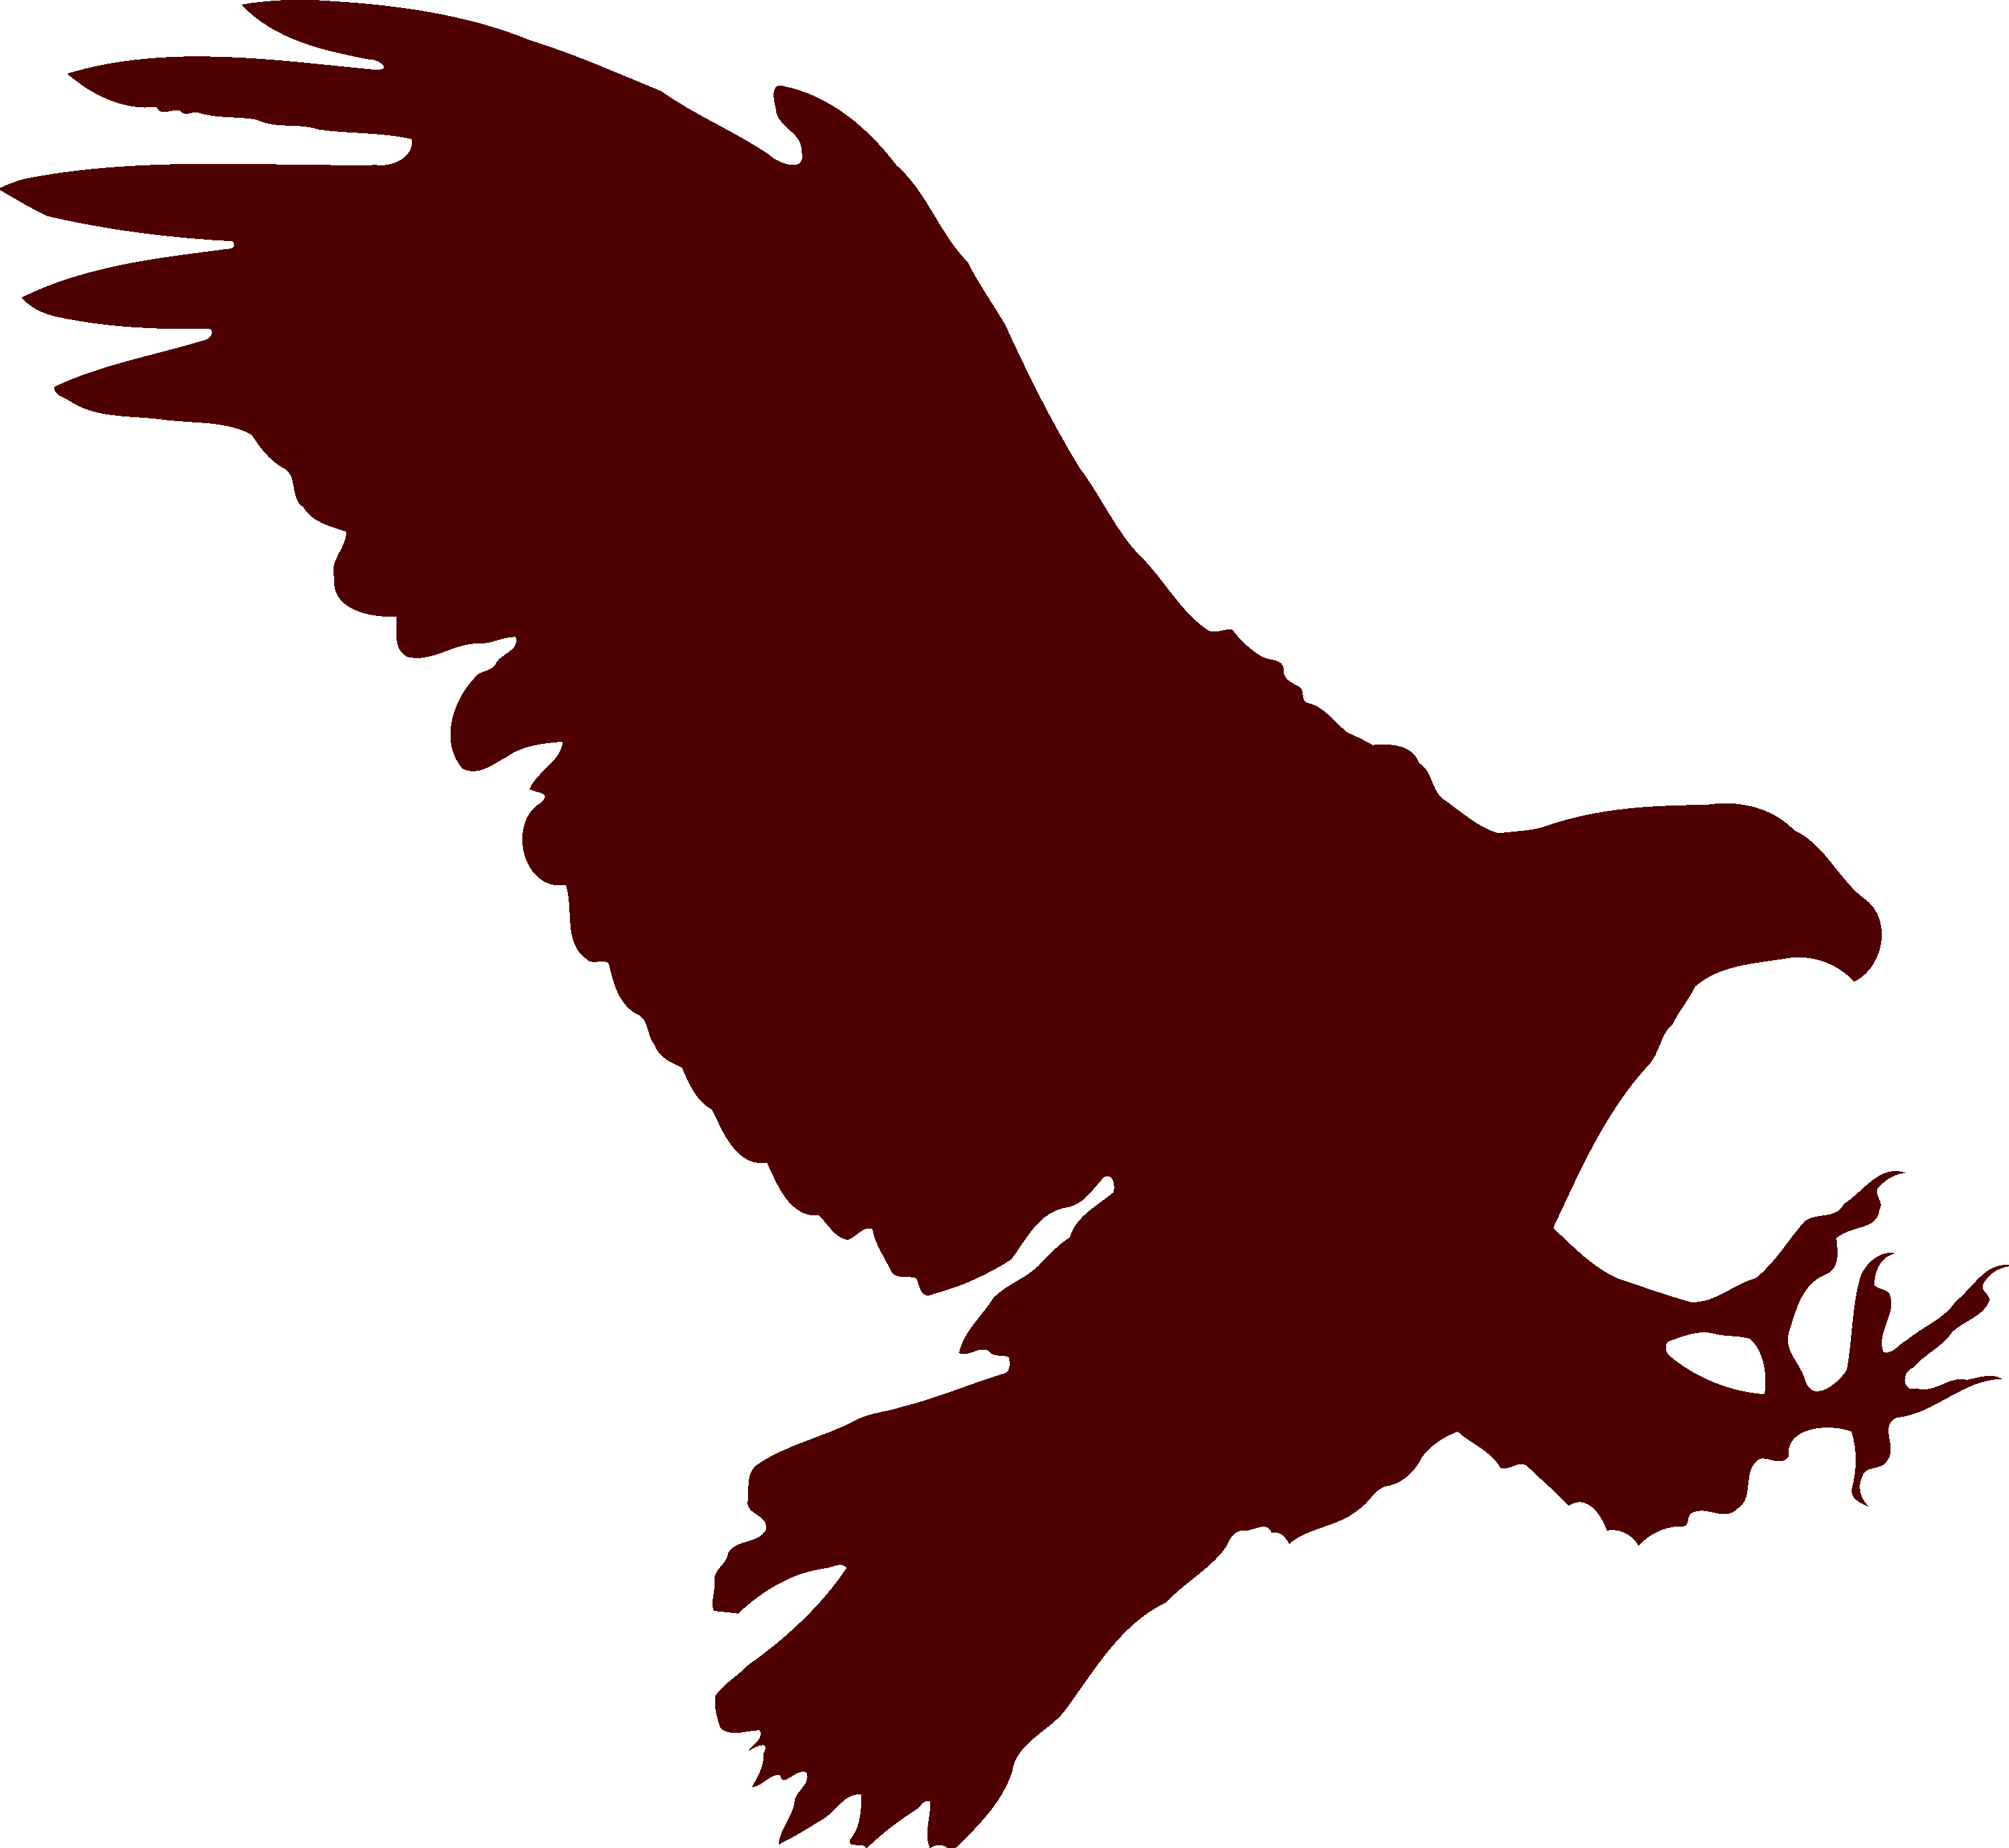 Bird Flying Red Free Vector Graphic On Pixabay - Flying Eagle Silhouette (3000x2760)